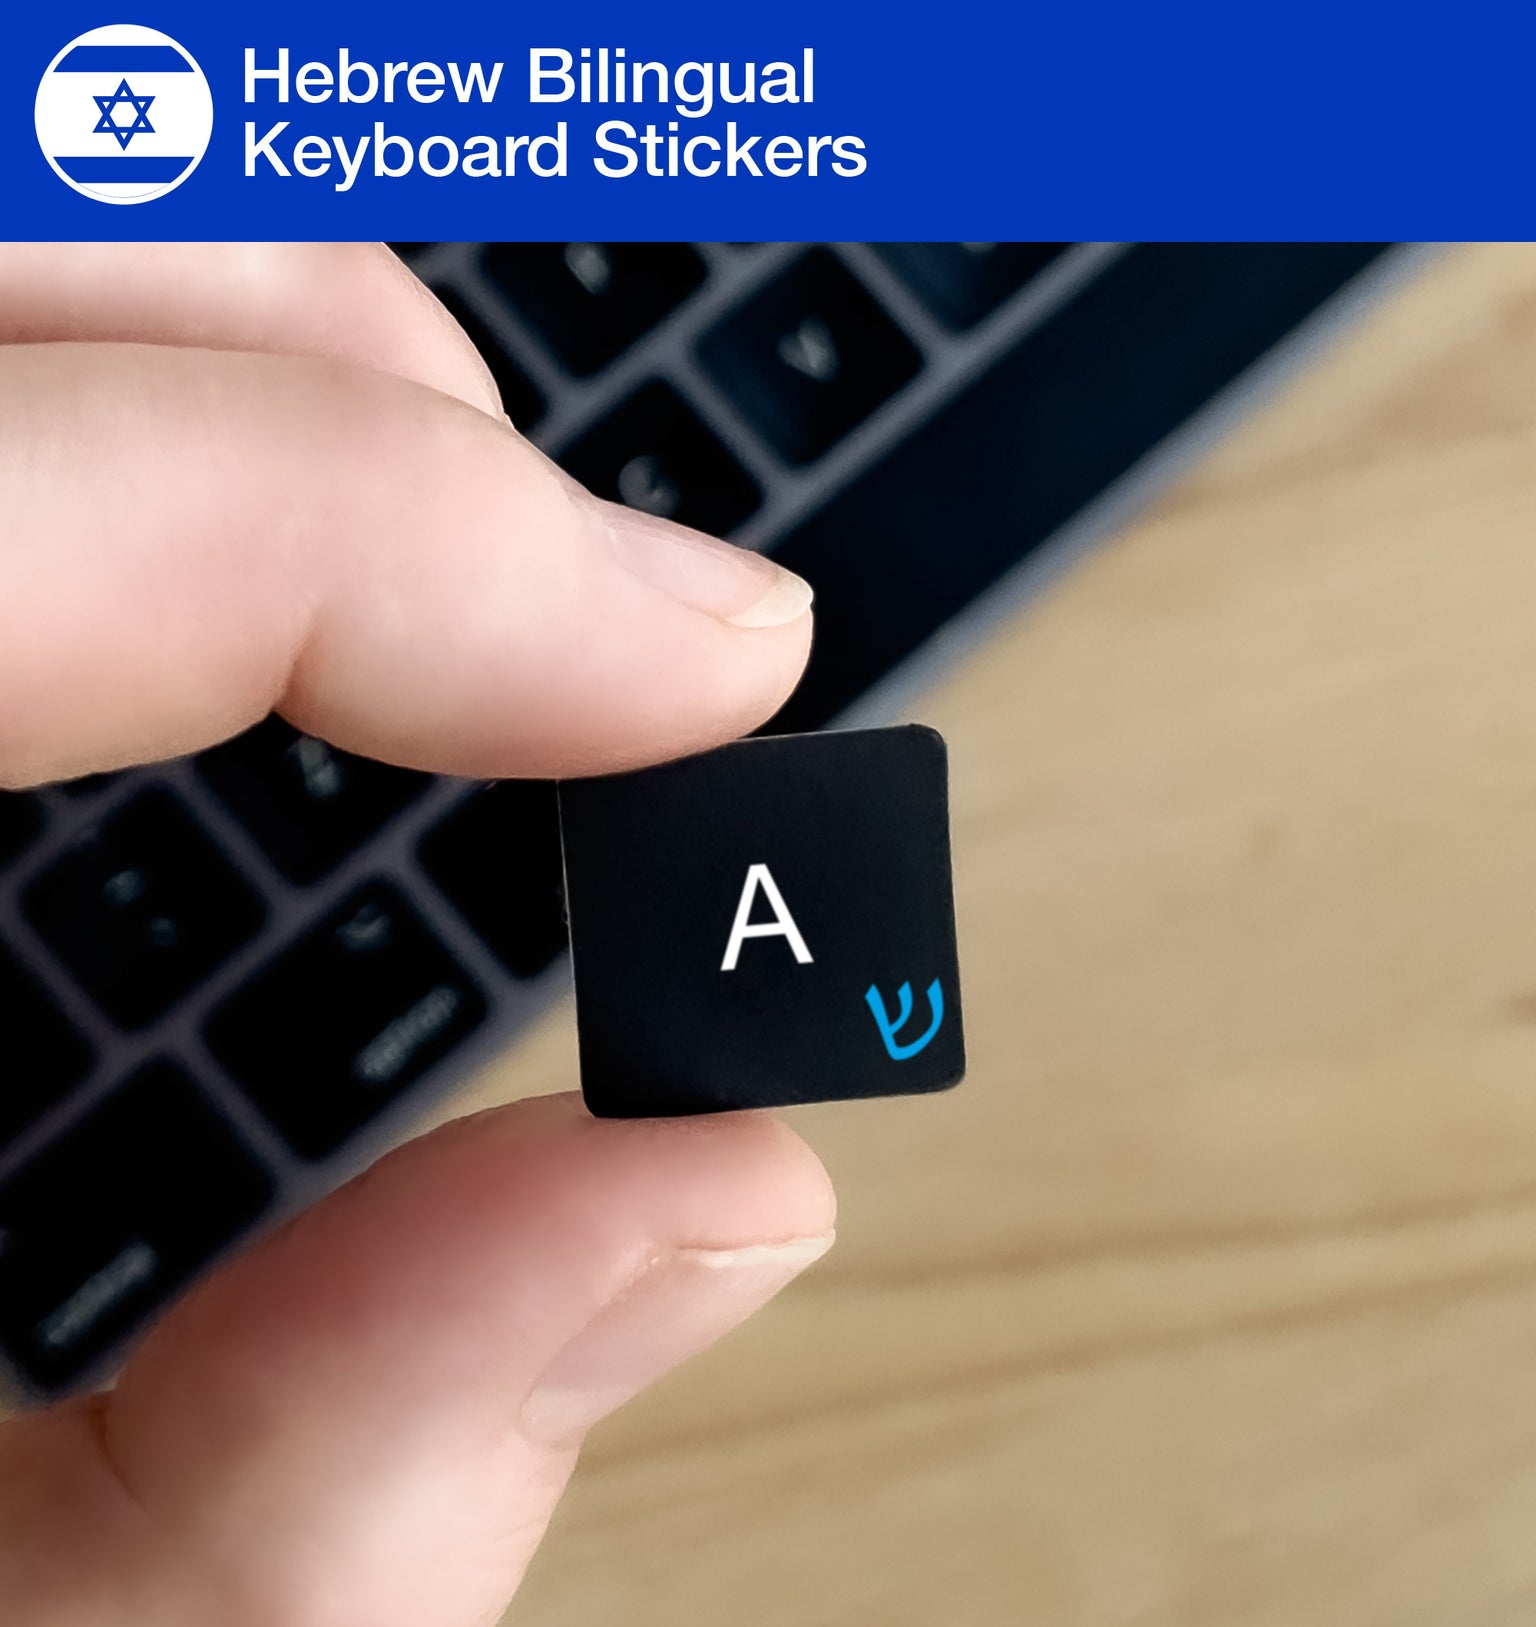 Hebrew Bilingual Keyboard Stickers with Hebrew layout